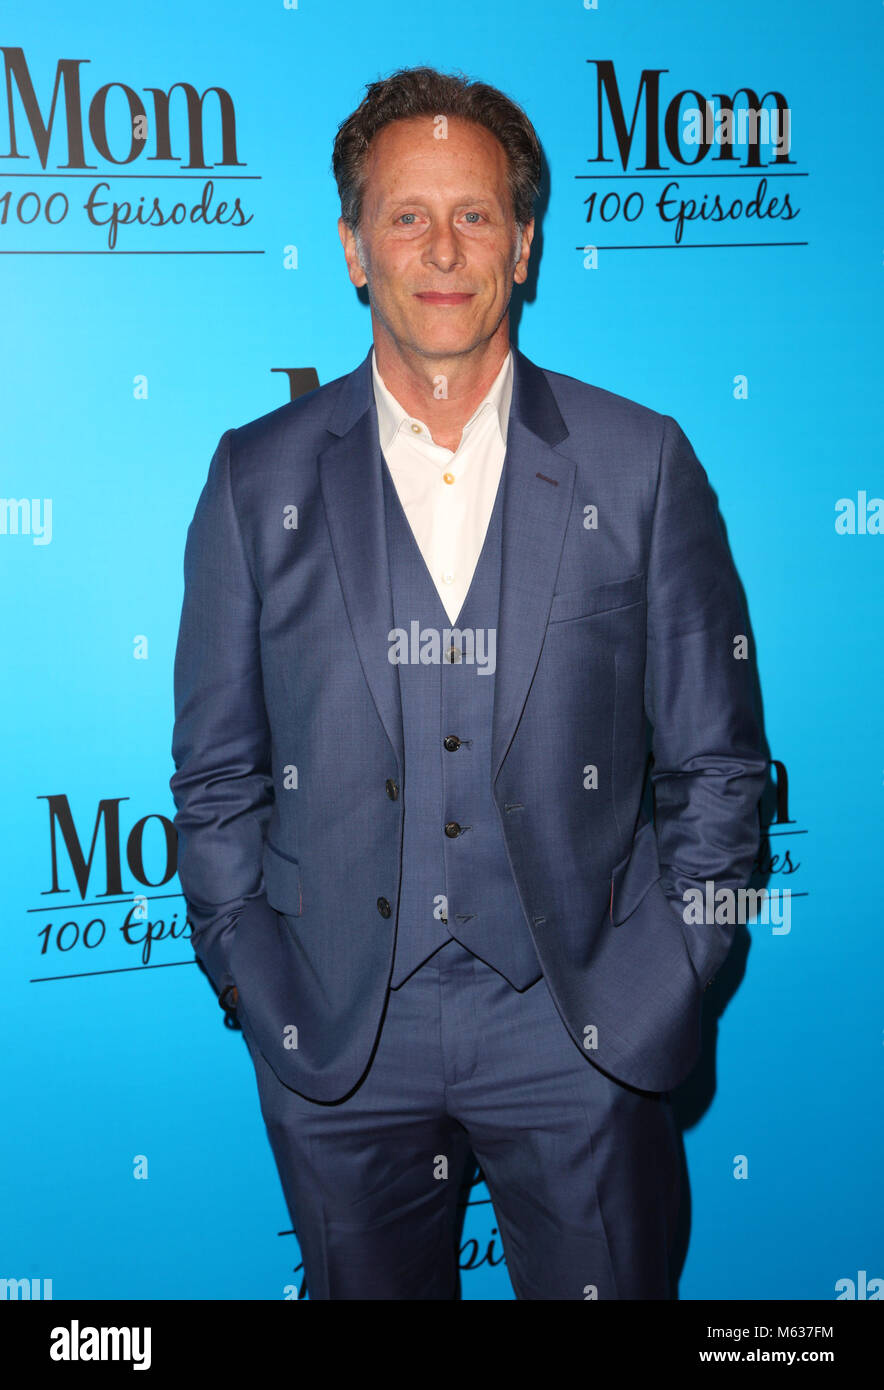 Celebrities attend CBS And Warner Bros. Television's 'Mom' Celebrates 100 Episodes at TAO Hollywood.  Featuring: Steven Weber Where: Los Angeles, California, United States When: 28 Jan 2018 Credit: Brian To/WENN.com Stock Photo